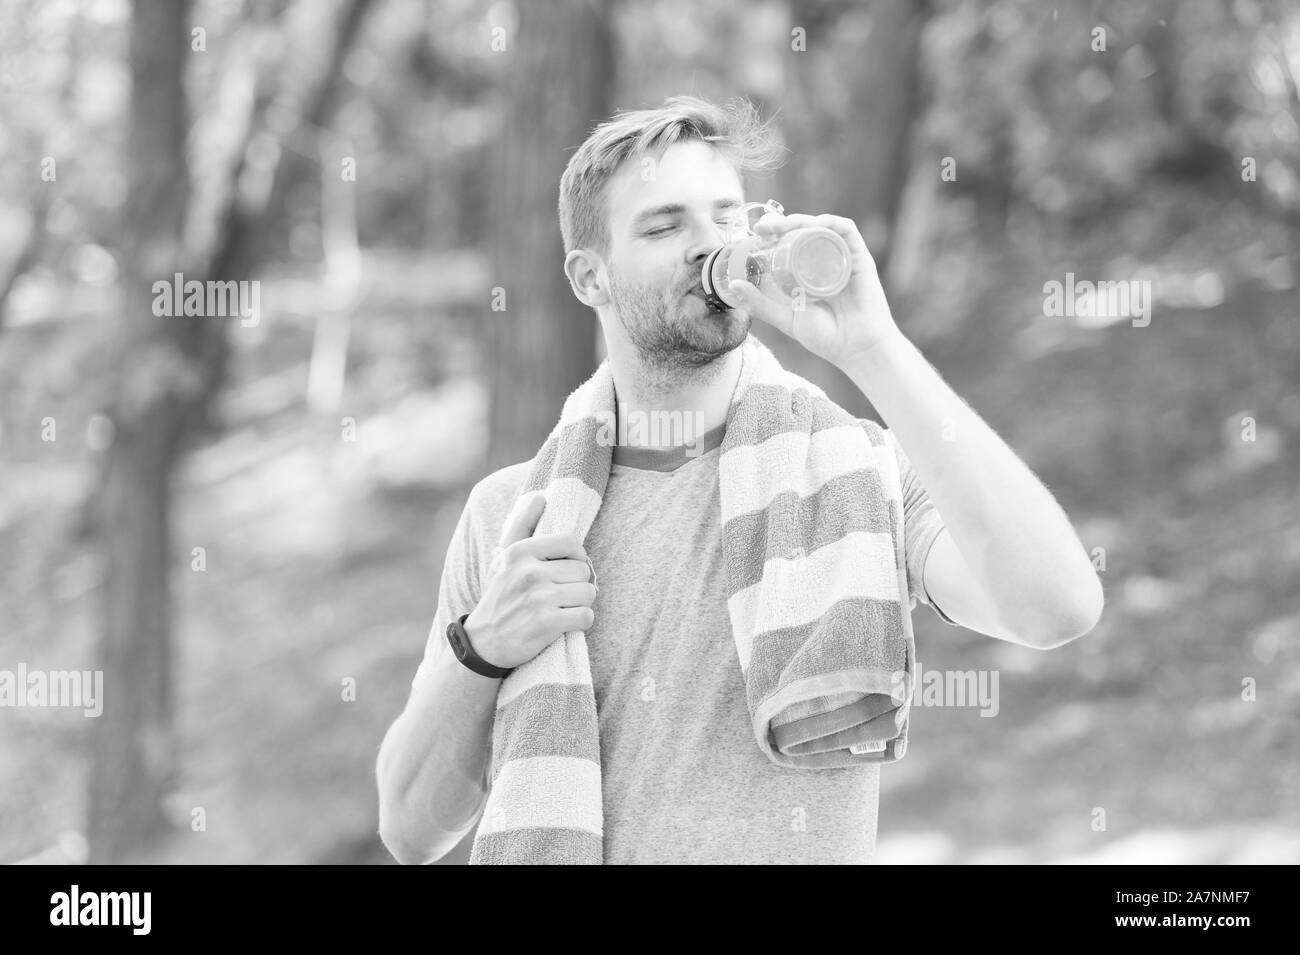 Water is indispensable for human health. Fit athlete having a drink from water bottle during training outdoor. Thirsty sportsman drinking pure water on hot summer day. Keeping body water balance. Stock Photo